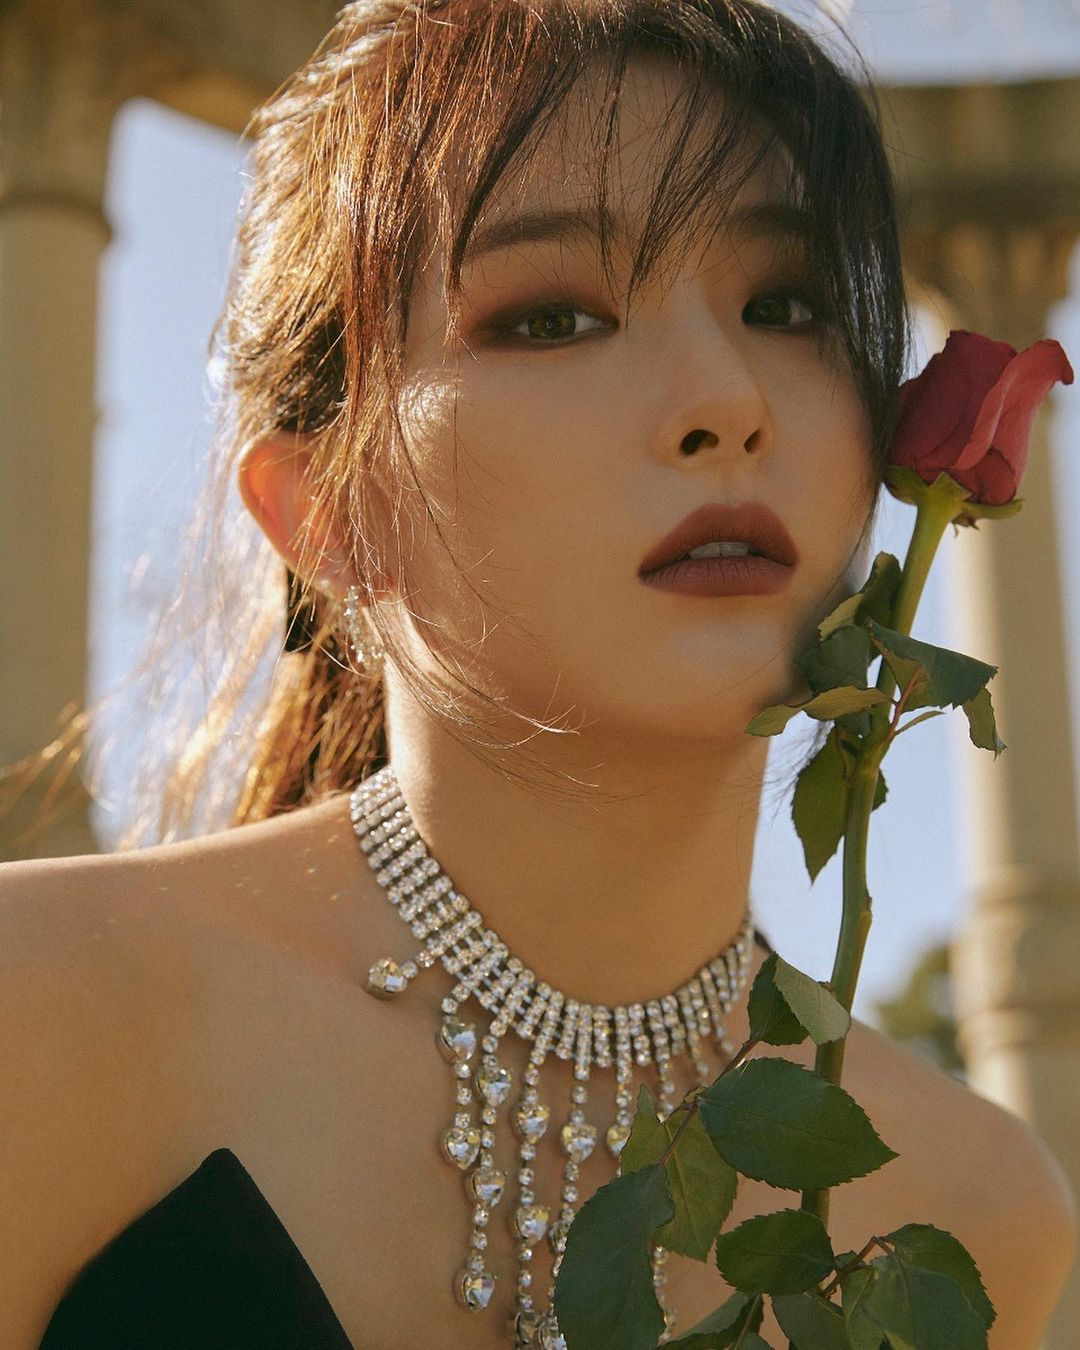 Seulgi 'Red Velvet' - Biography, Profile, Facts and Career